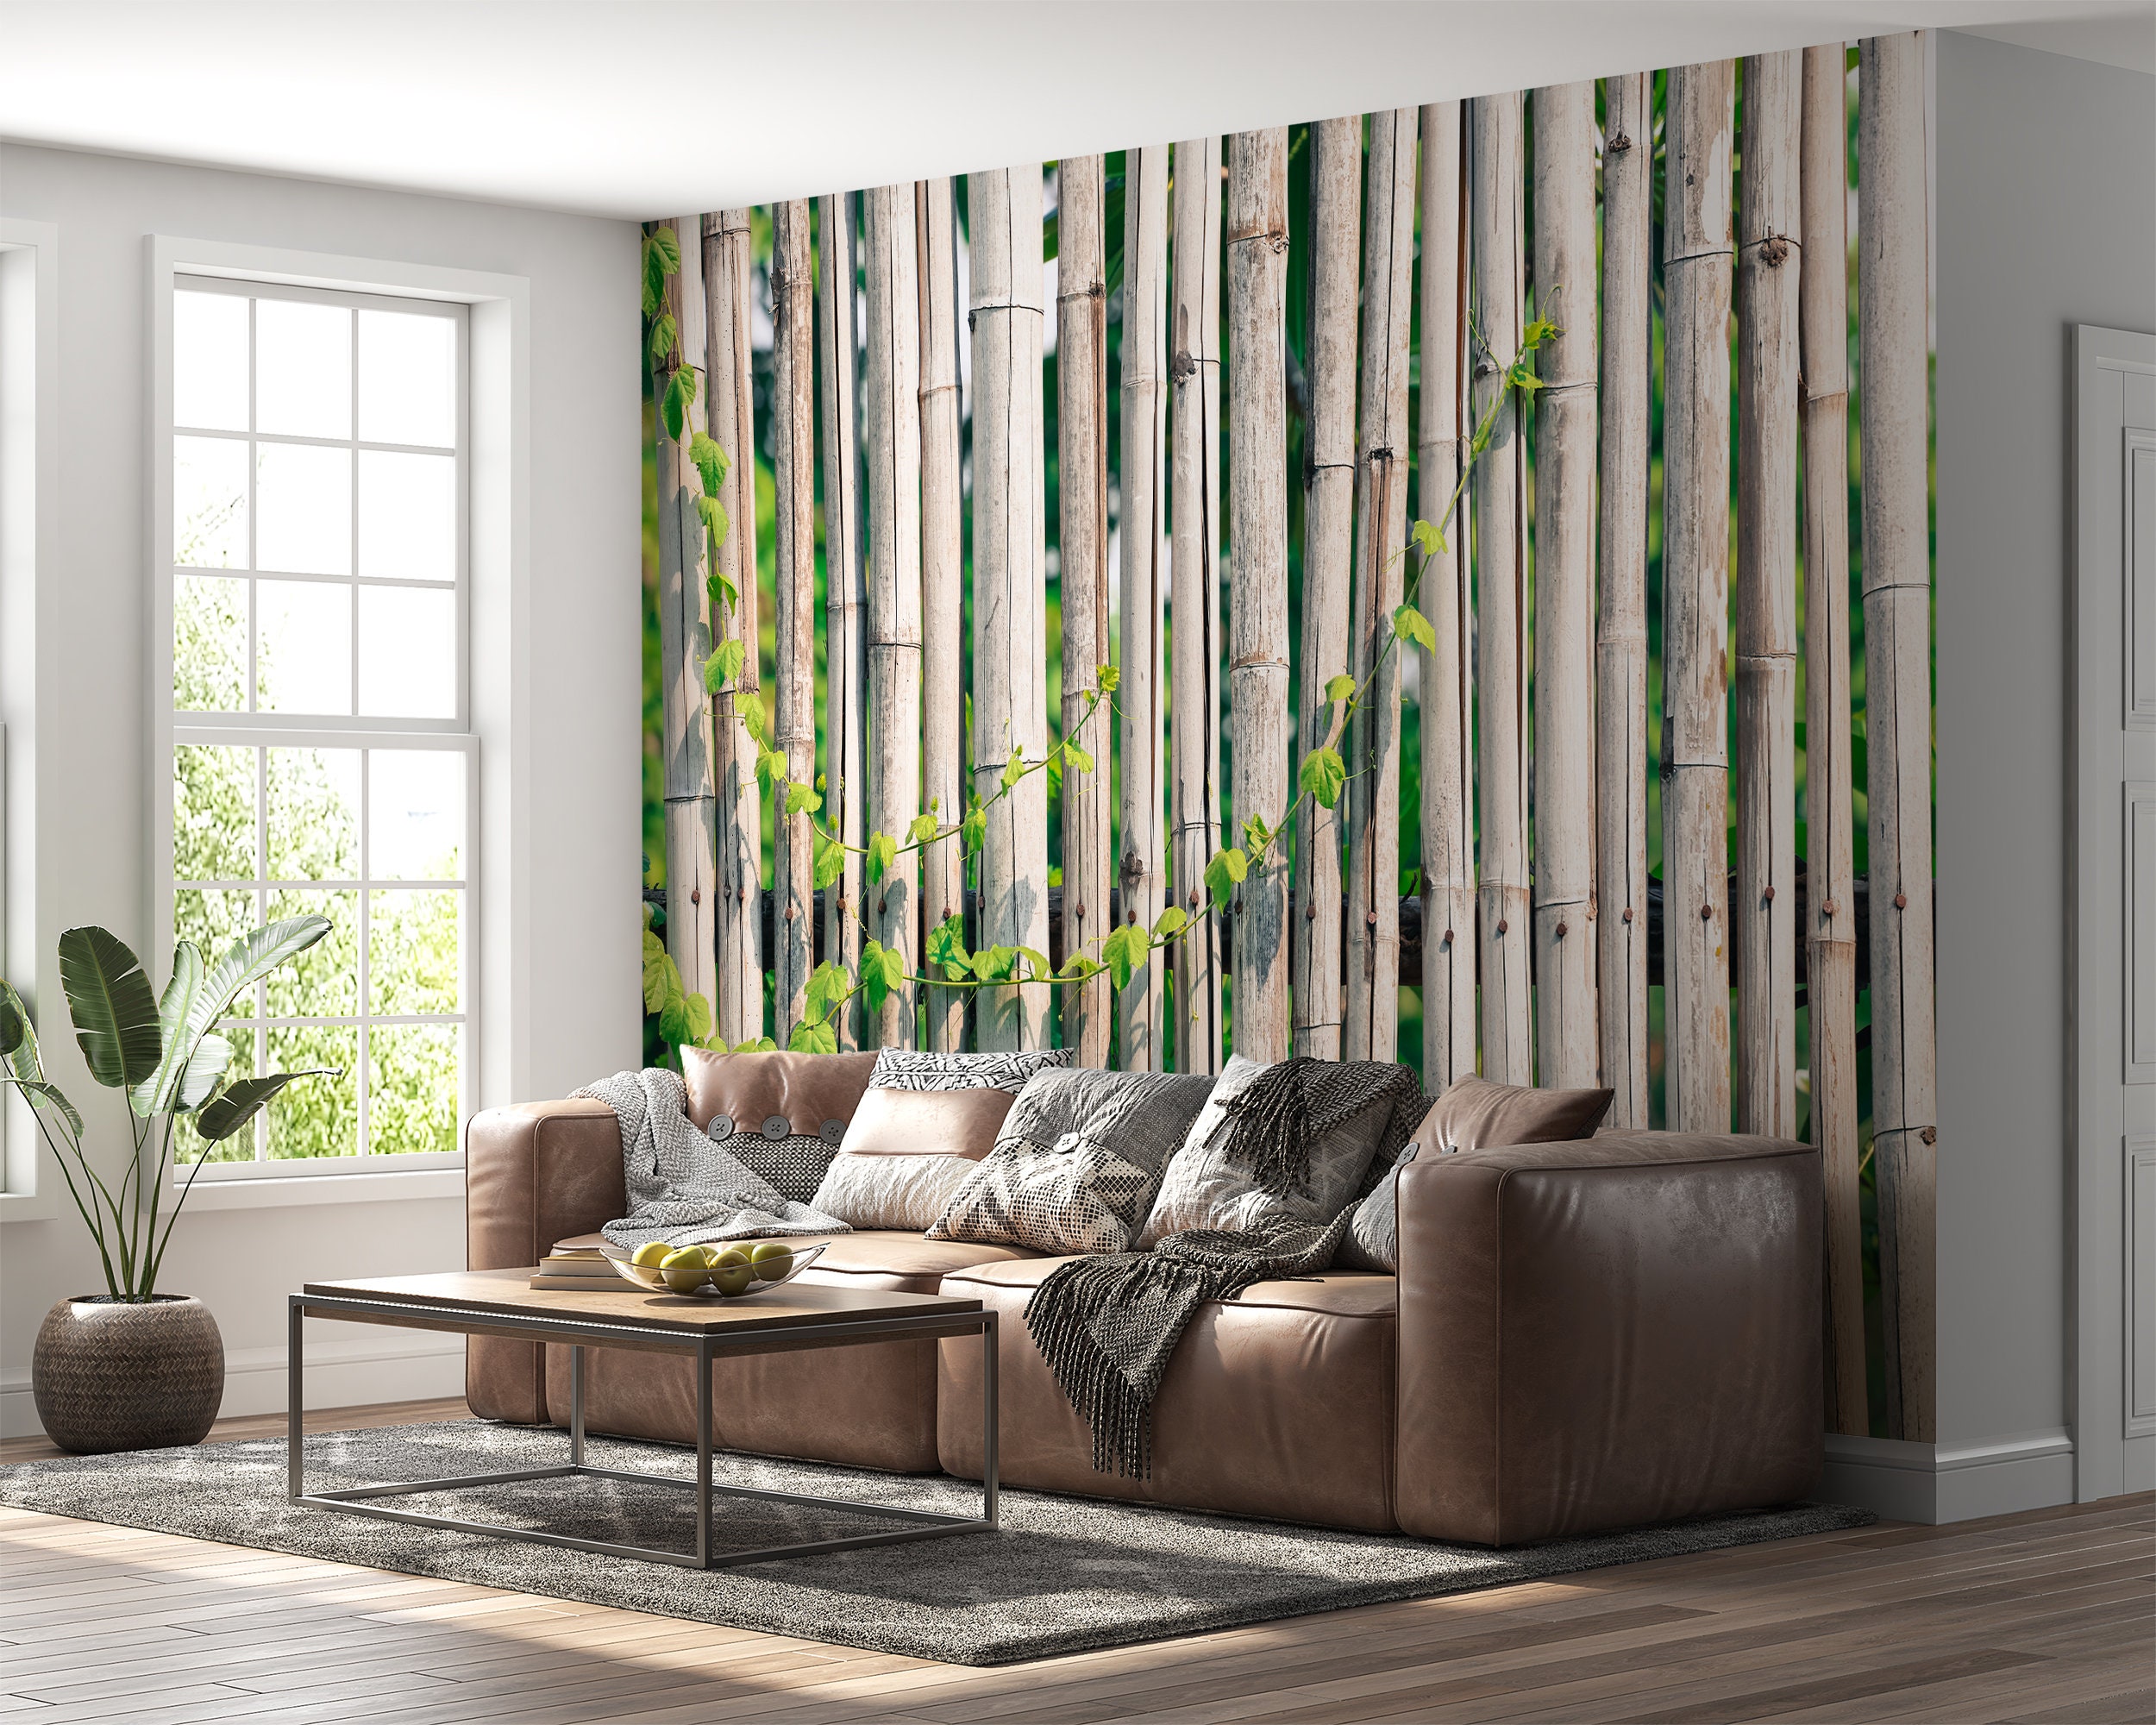 Bamboo Fabric, Wallpaper and Home Decor